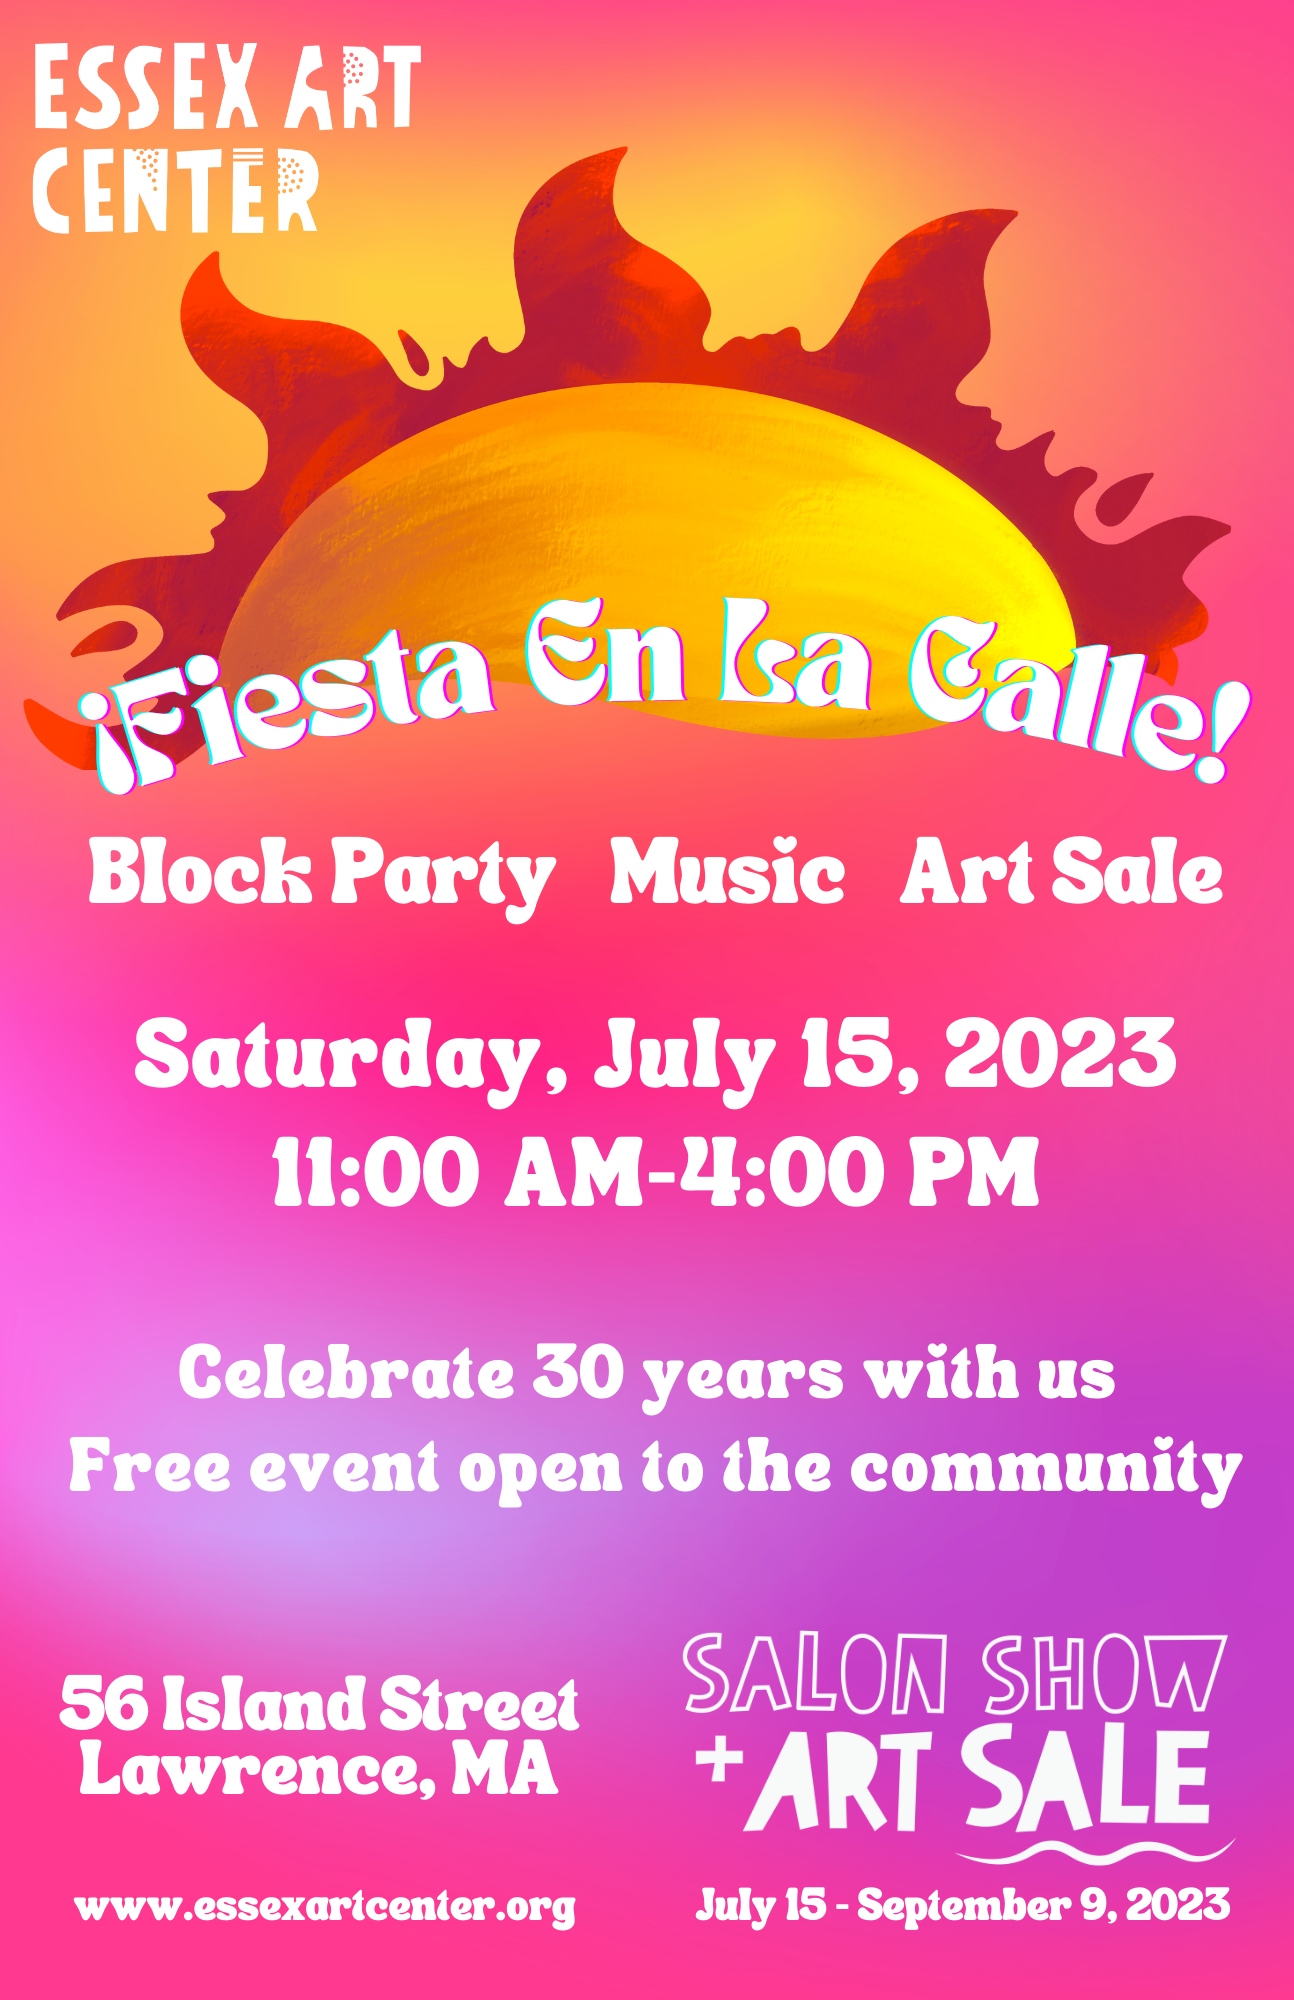 a flyer for a block party at the essex art center.